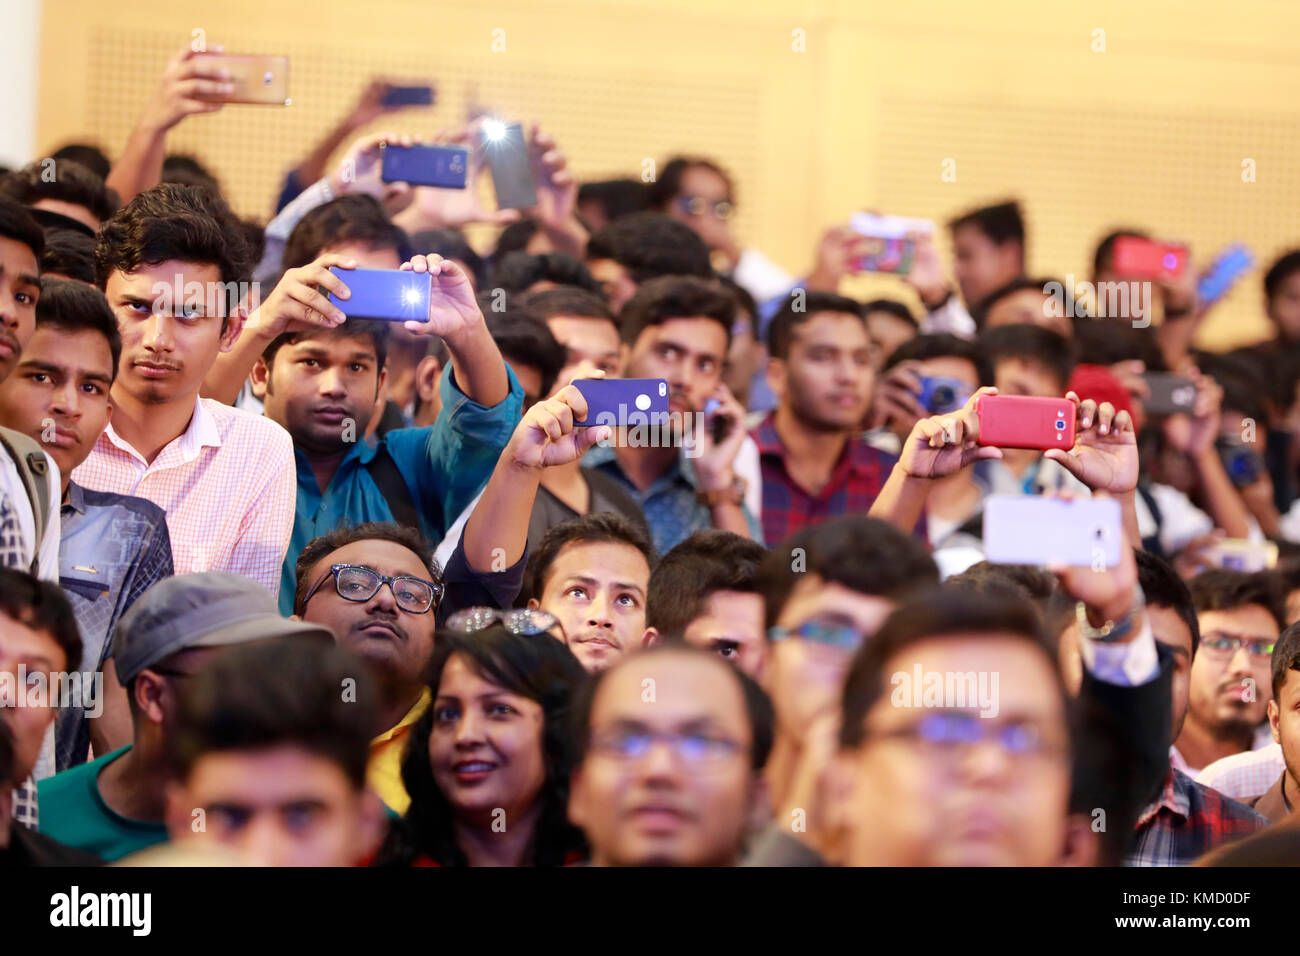 Dhaka, BANGLADESH – DECEMBER 06, 2017: Crowed gather to meet with the artificial intelligence imbued robot Sophia at Digital World 2017 expo in Dhaka, Bangladesh. Sophia, the world’s first robot citizen with artificial intelligence, arrived in Dhaka early Tuesday to attend Digital World 2017. Credit: SK Hasan Ali/Alamy Live News Stock Photo